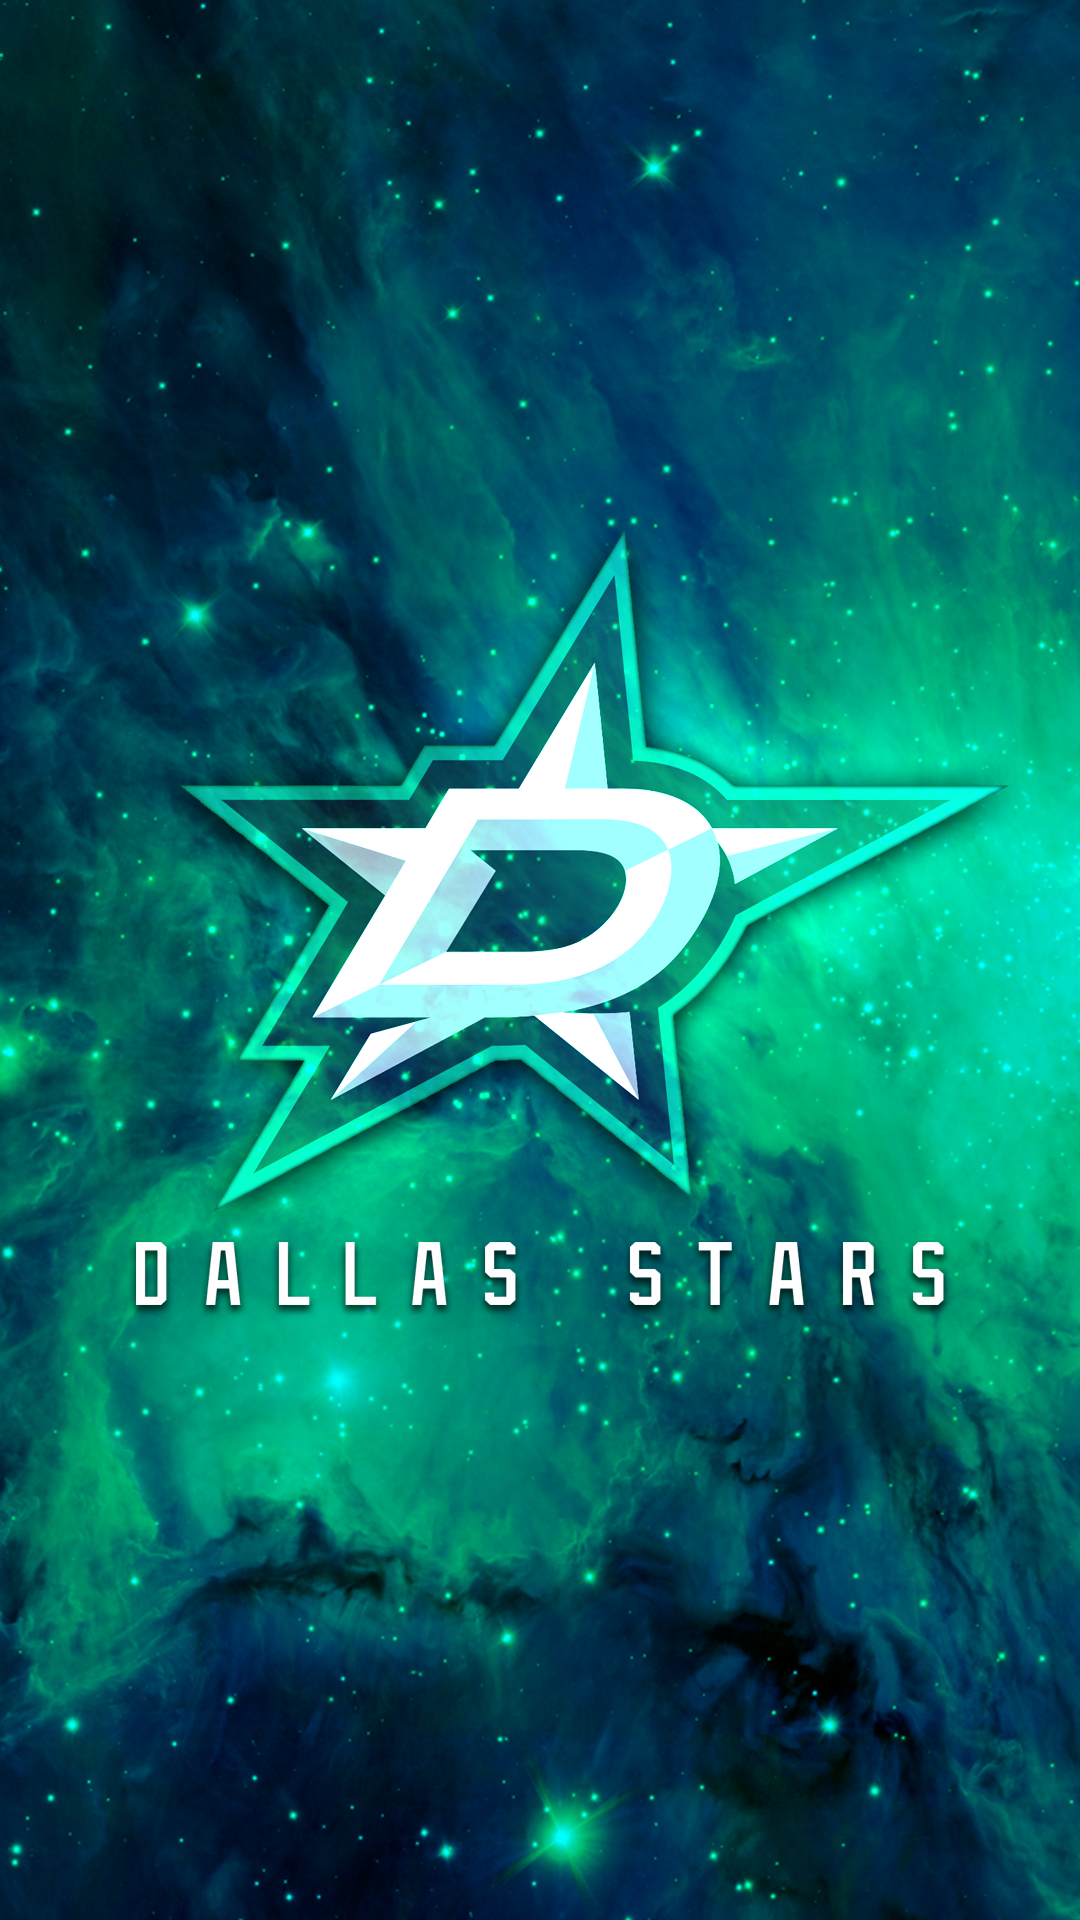 Dallas Stars Wallpapers 67 images in Collection Page 1